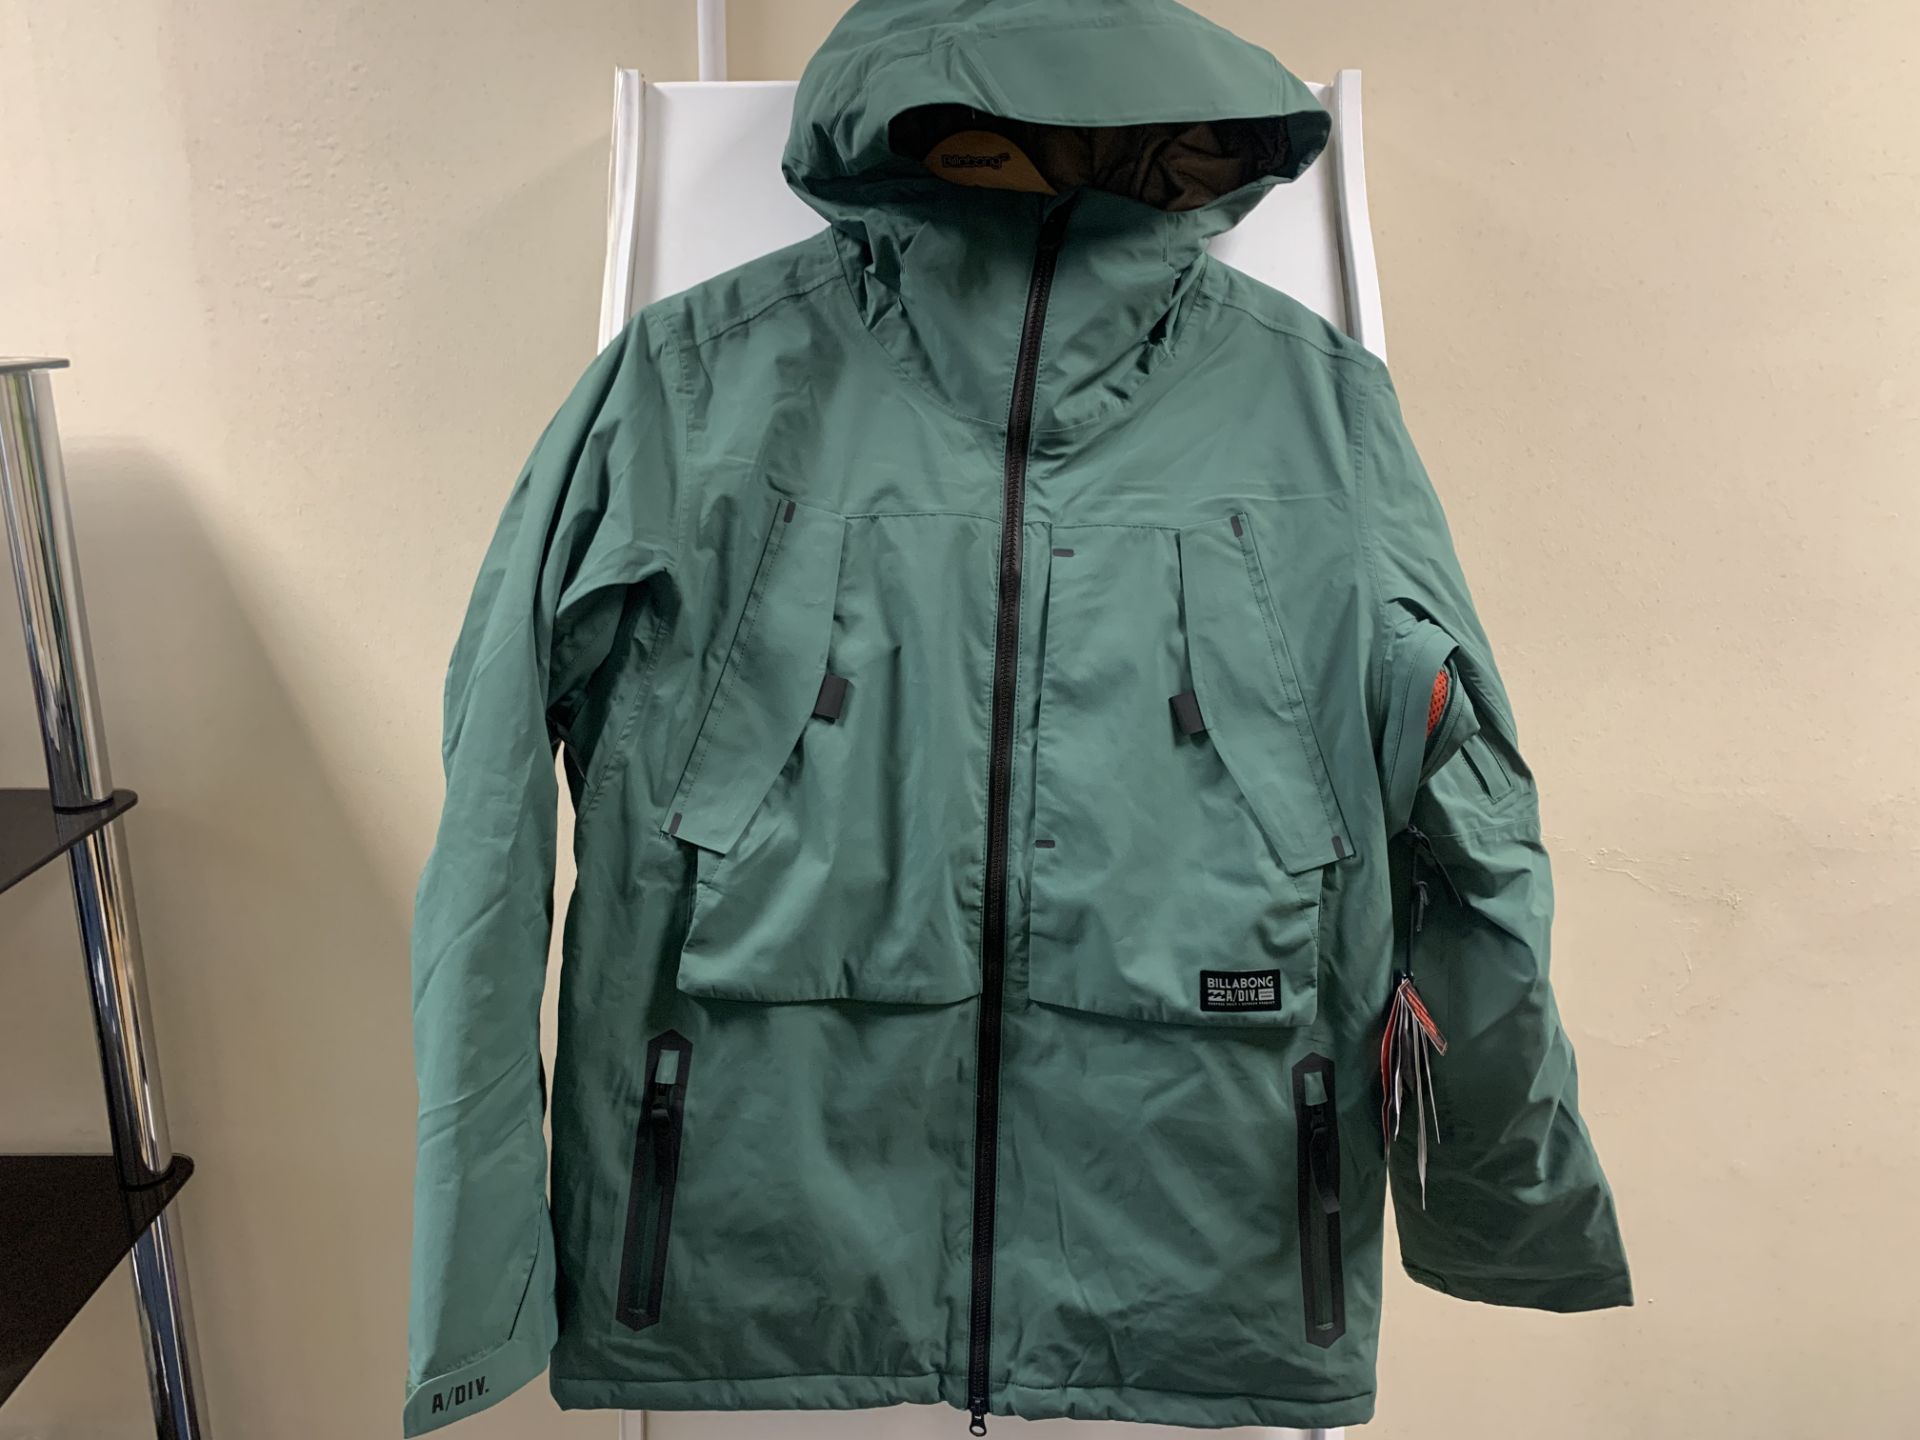 BRAND NEW BILLABONG PRISM STX INSULATED FOREST JACKET SIZE XL RRP £295